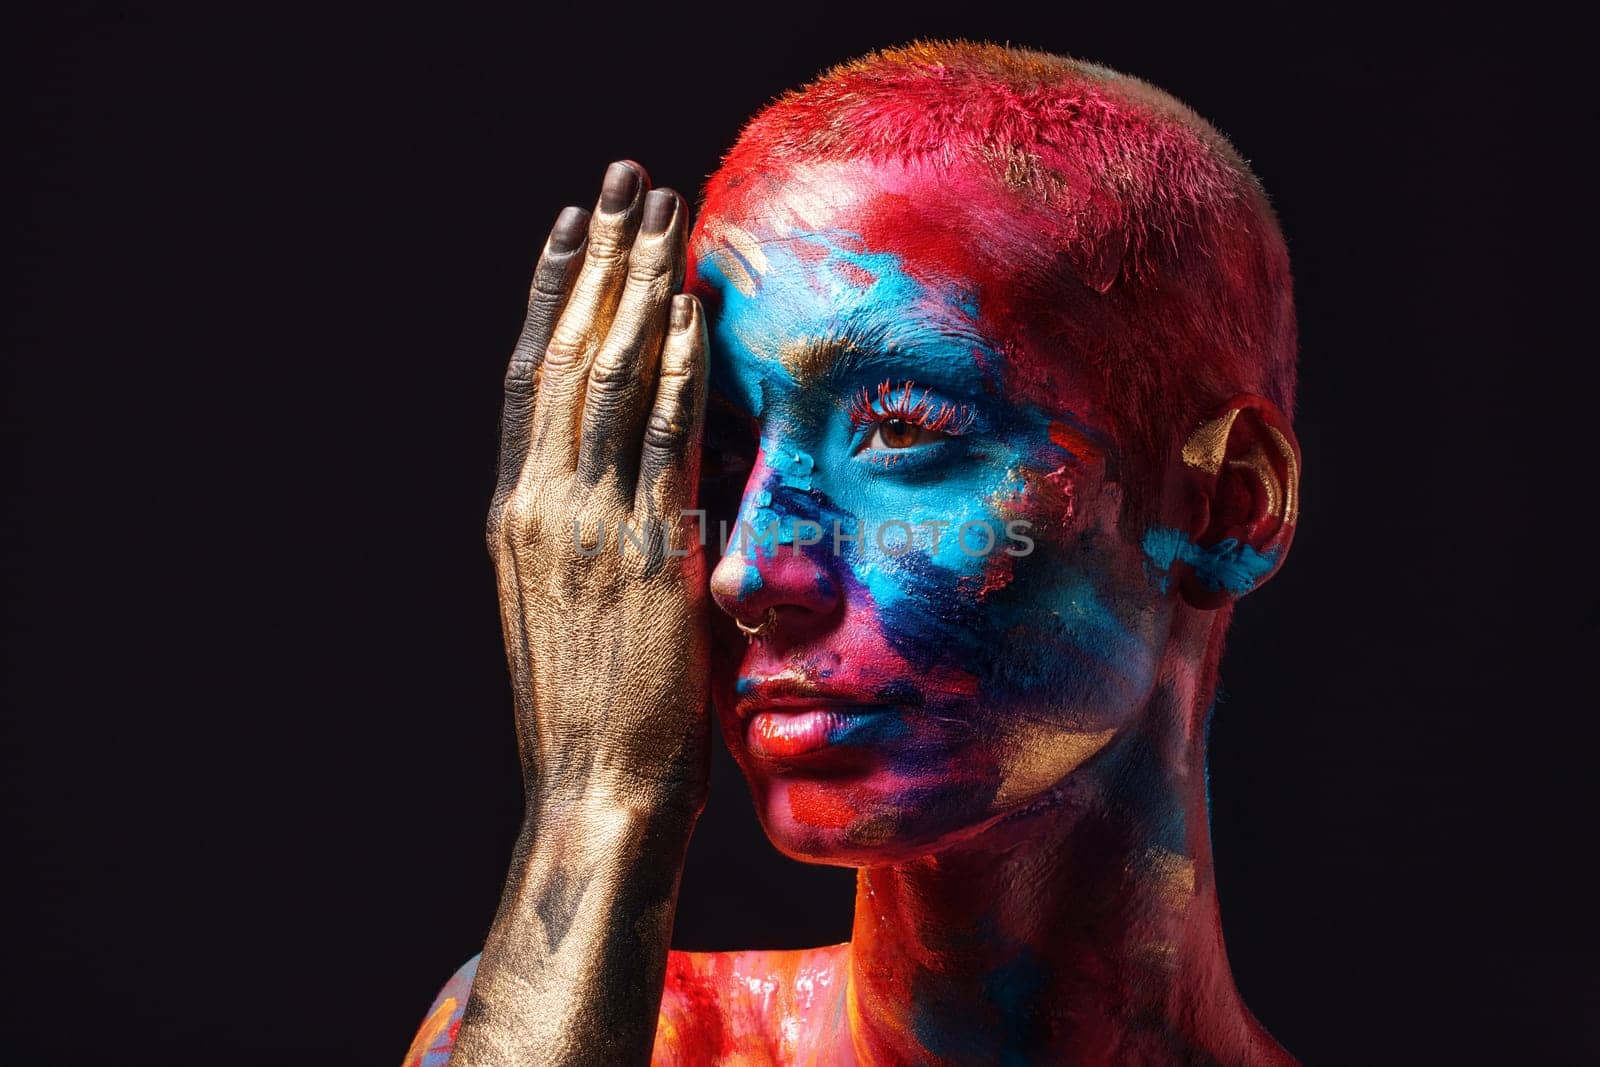 My colourful vision will never be altered. an attractive young woman posing alone in the studio with paint on her face